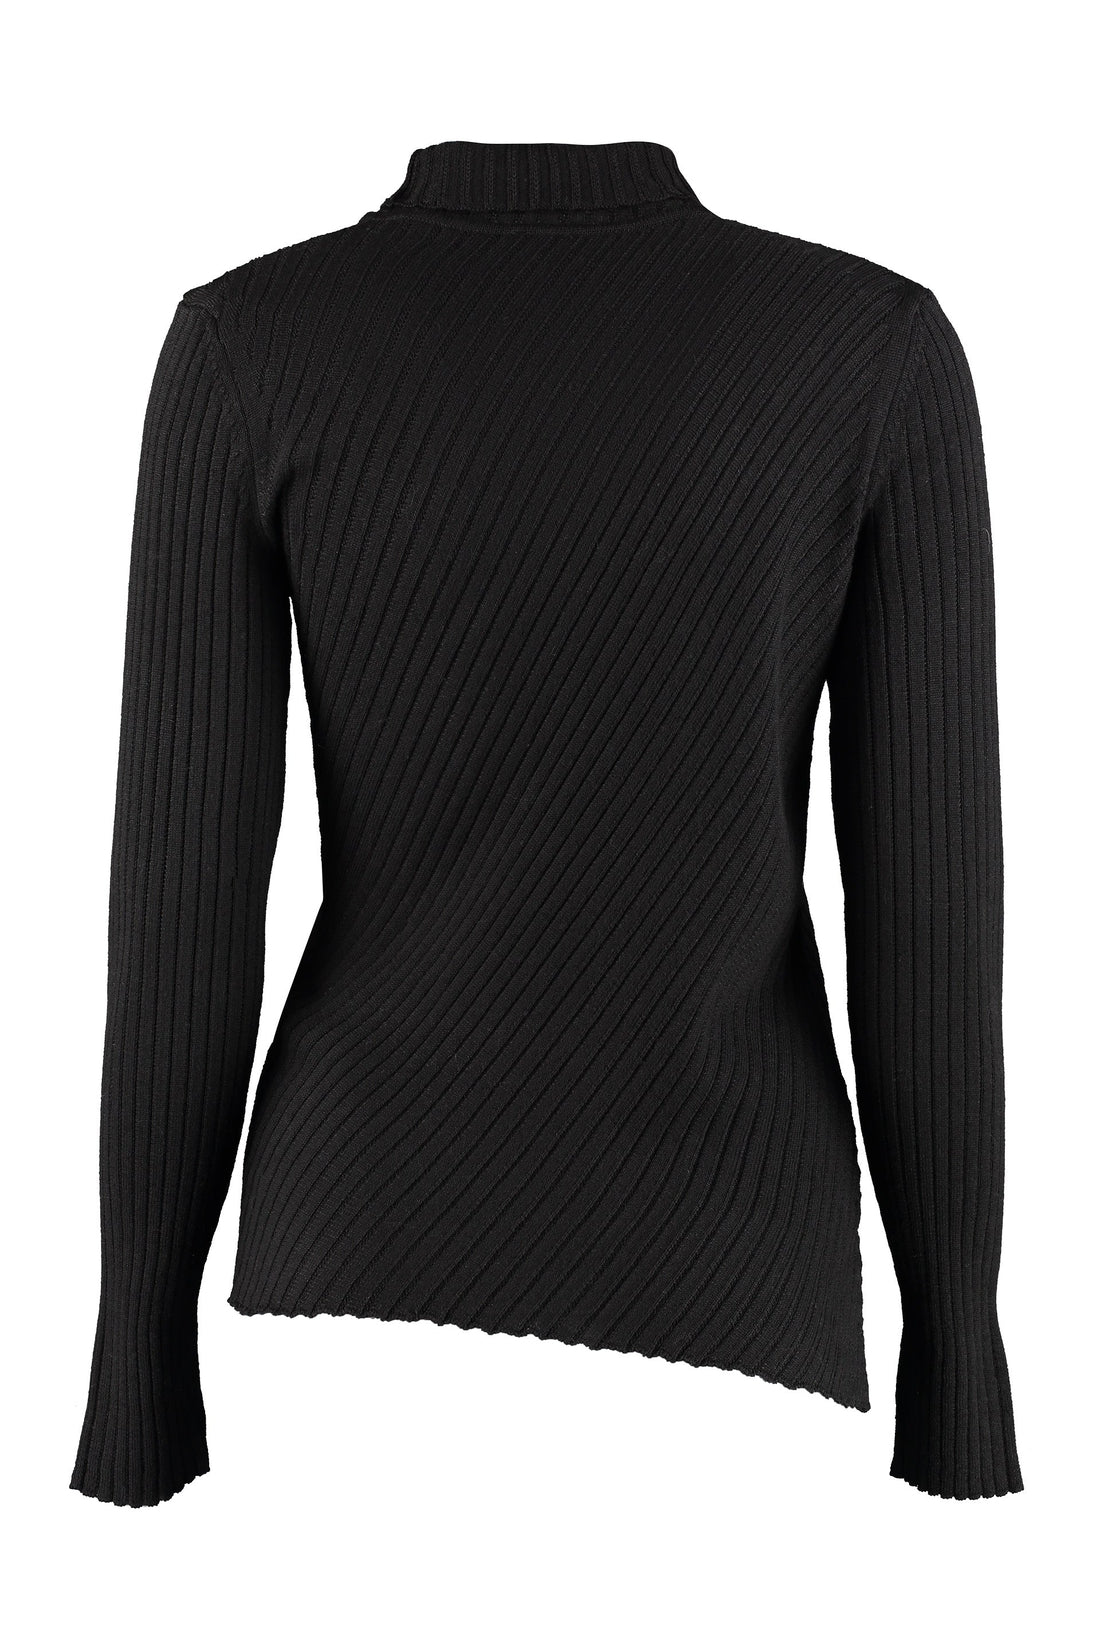 Pinko-OUTLET-SALE-Precolombiano ribbed turtleneck sweater-ARCHIVIST